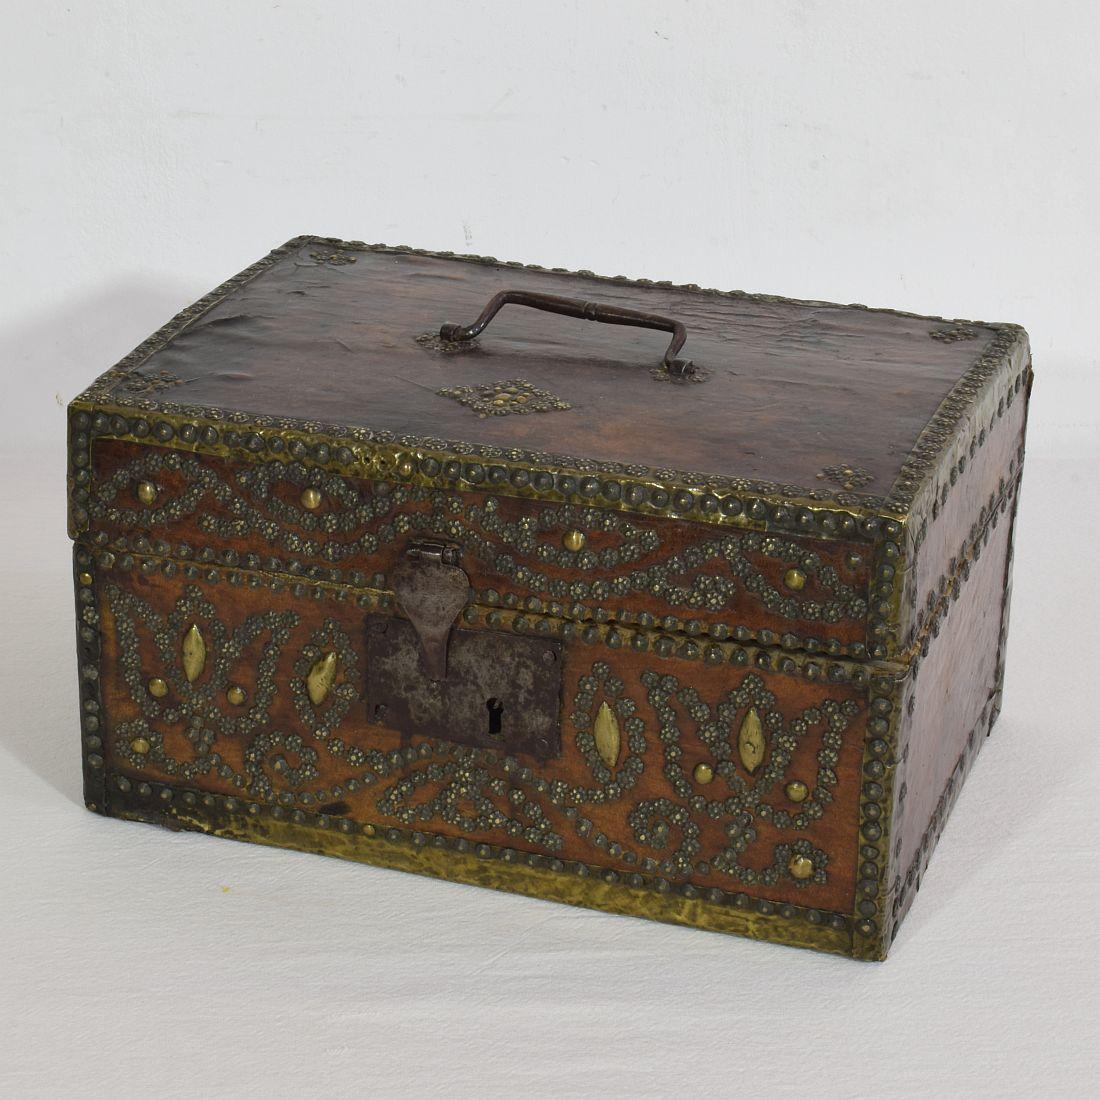 Extremely old box that is covered with leather and decorated with iron and brass. 
Rare find.
France, circa 1600-1700
Weathered and some losses.